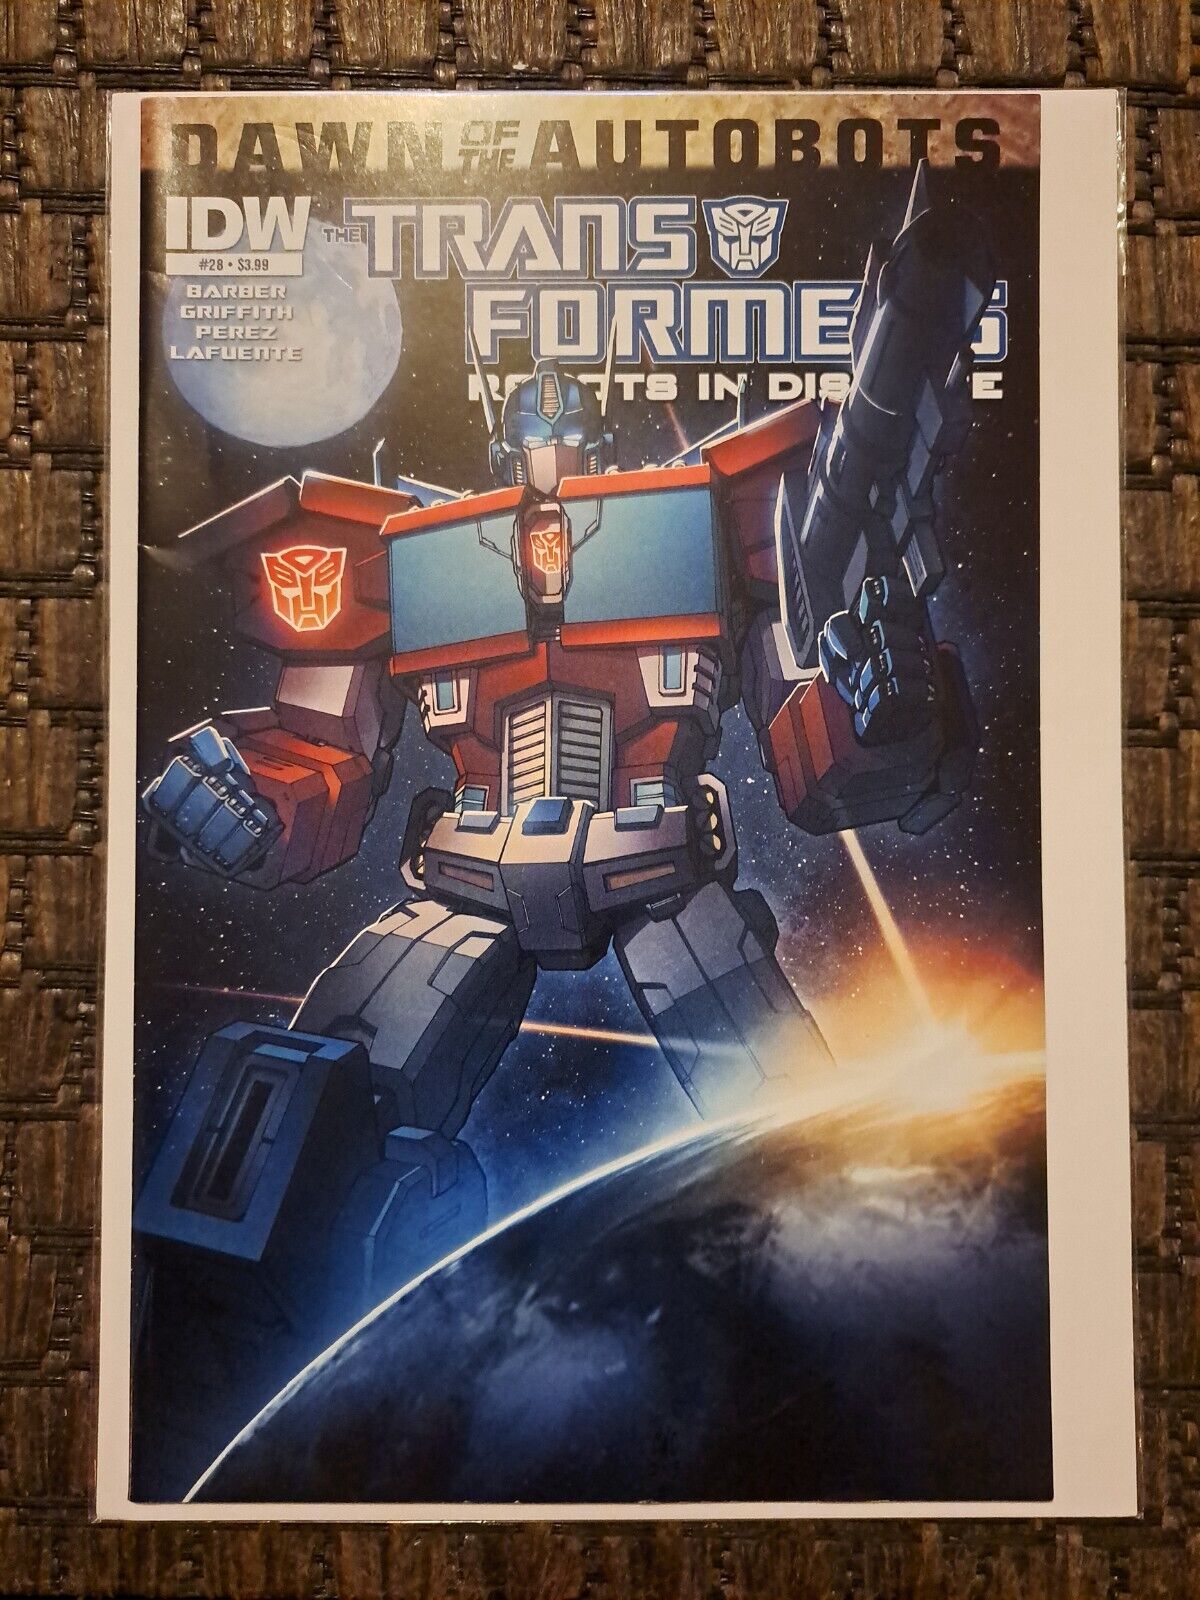 Transformers Robots in Disguise #28 - IDW - Dawn of the Autobots - 10 Pics